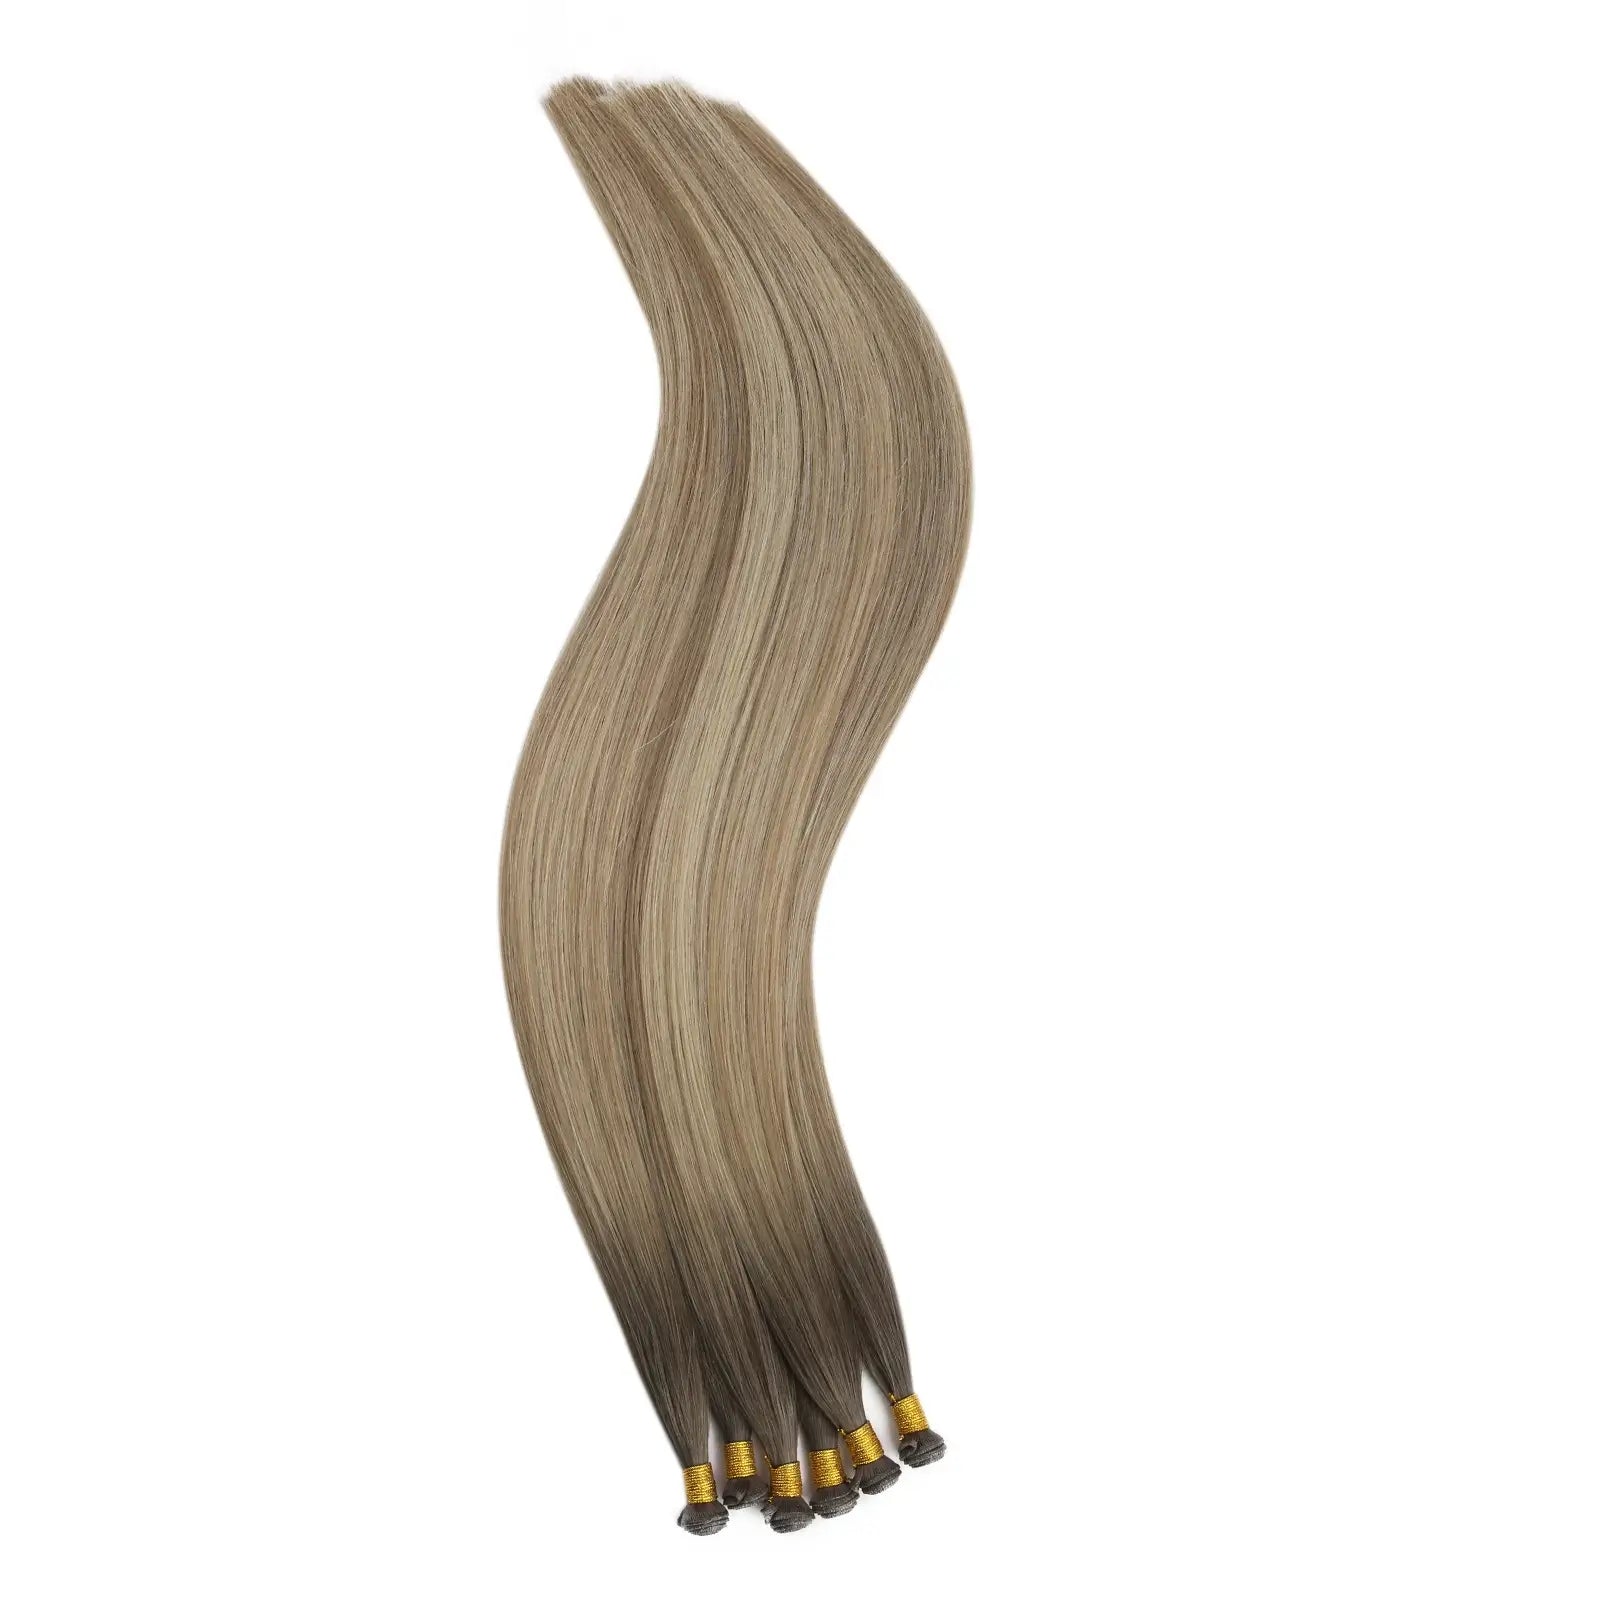 Genius Weft Extensions Human Hair Brown With Blonde Balayage